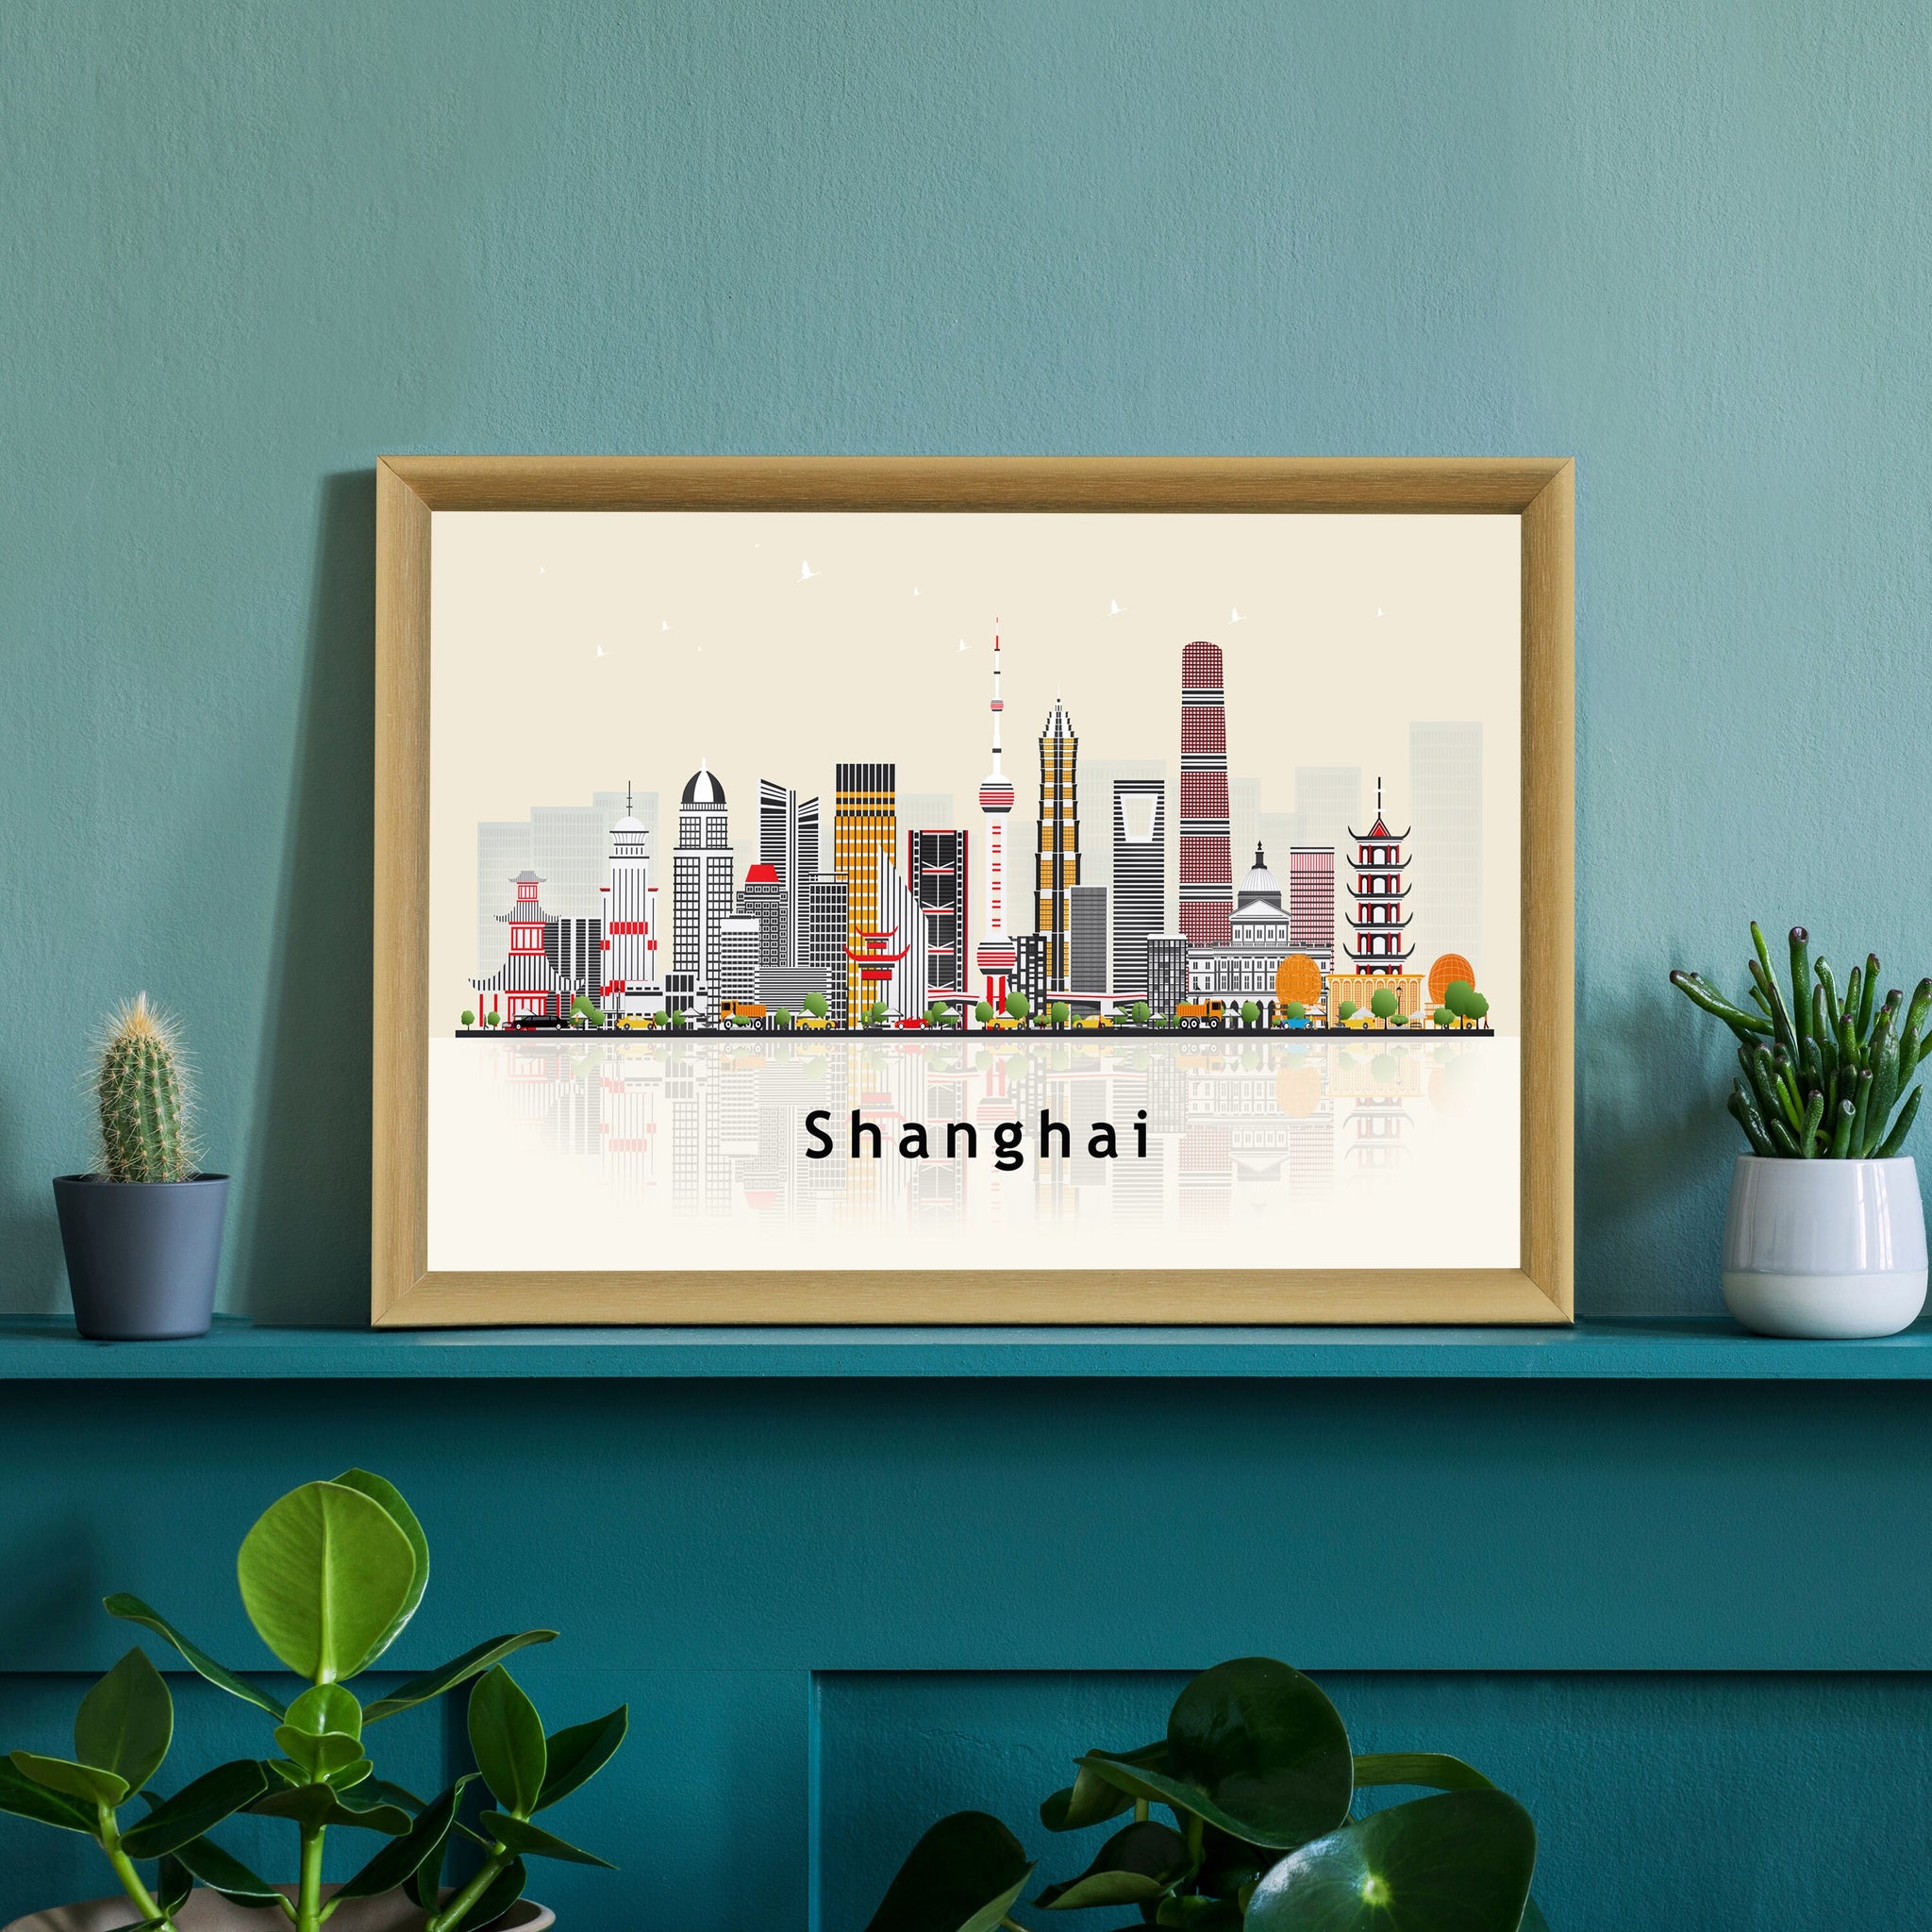 SHANGHAI CHINA Illustration skyline poster, Modern skyline cityscape poster, China city skyline landmark map poster, Home wall decoration